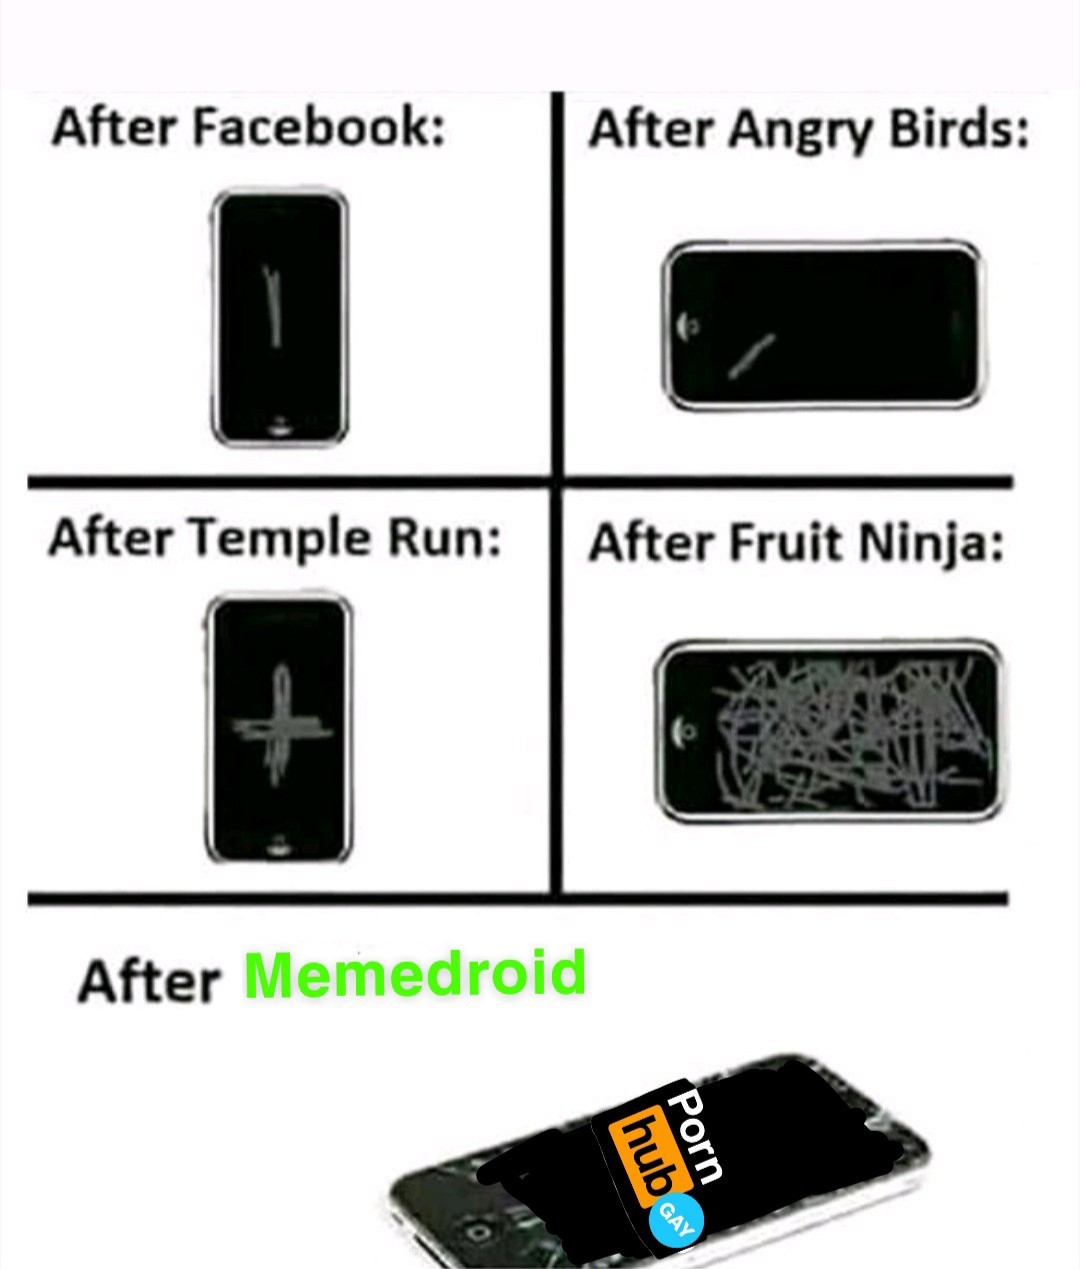 That's you, memedroider